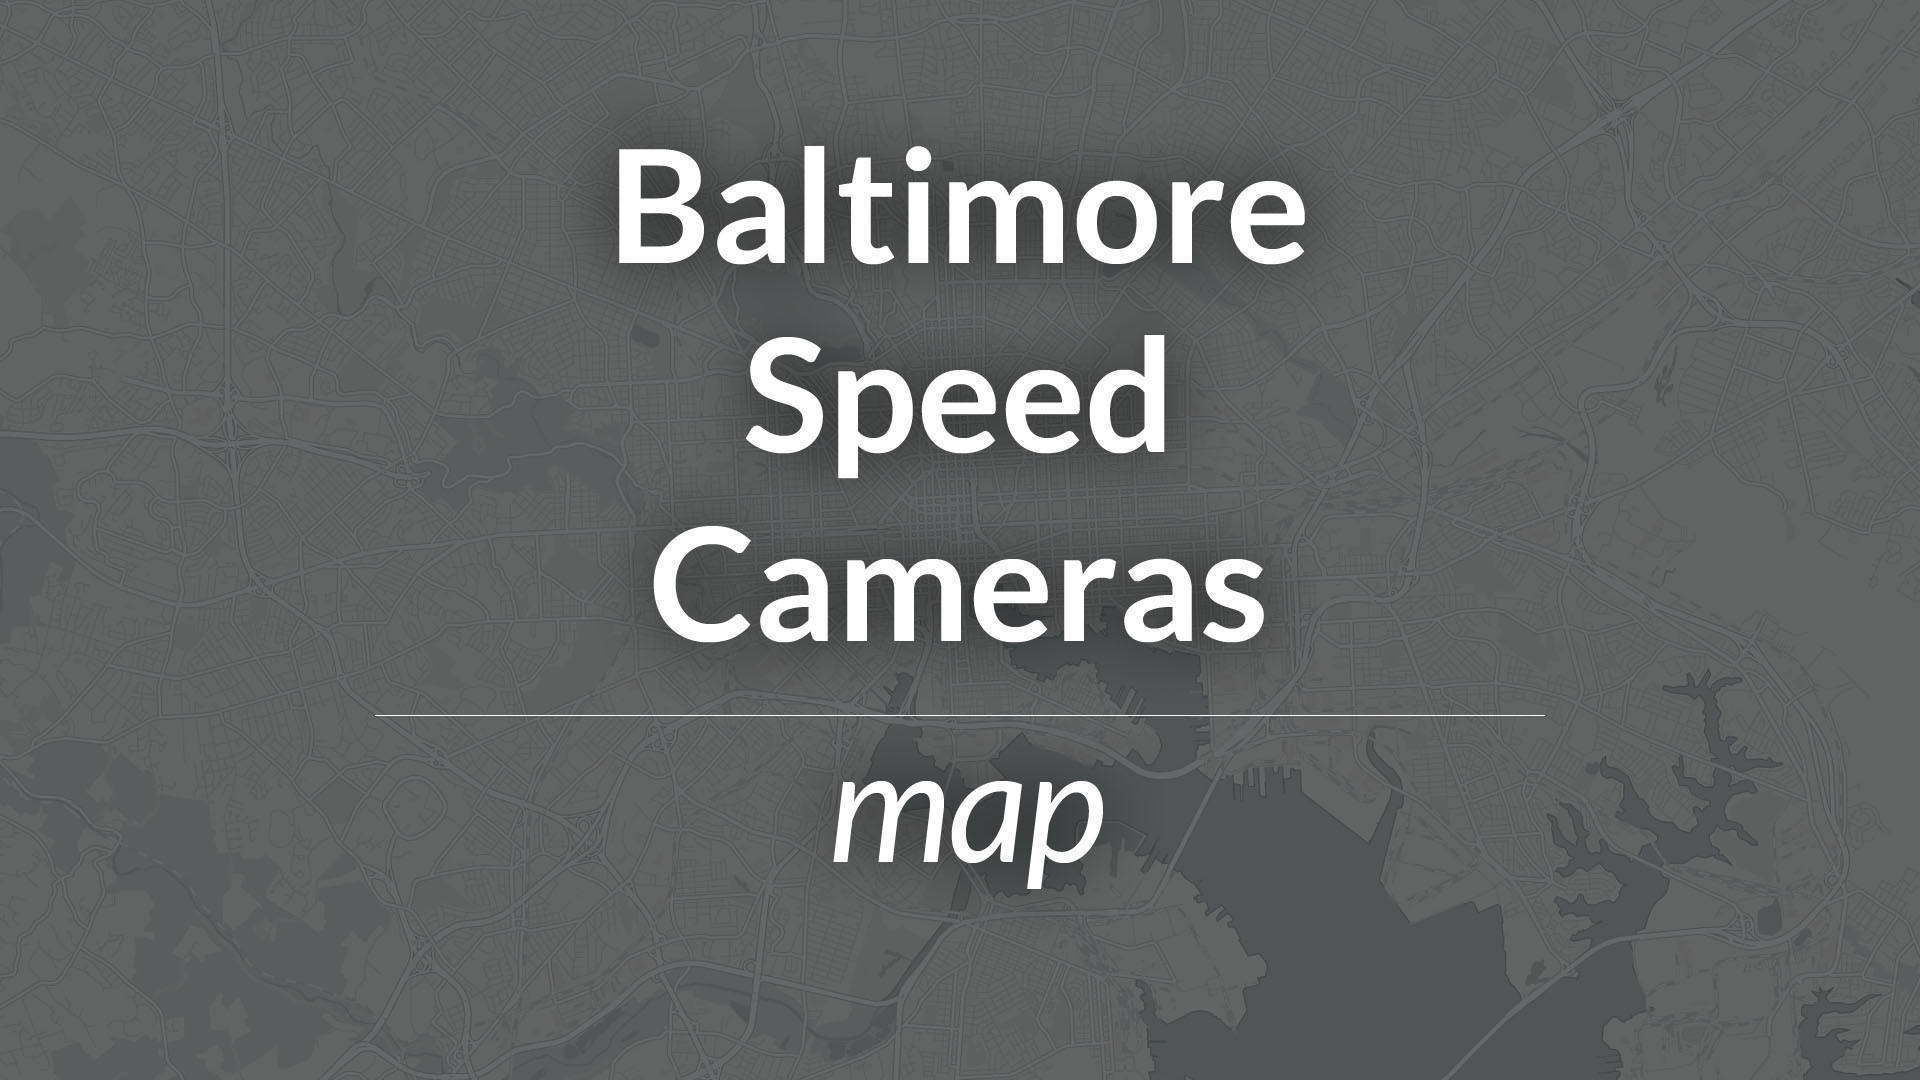 bs md baltimore speed cameras map 20170623